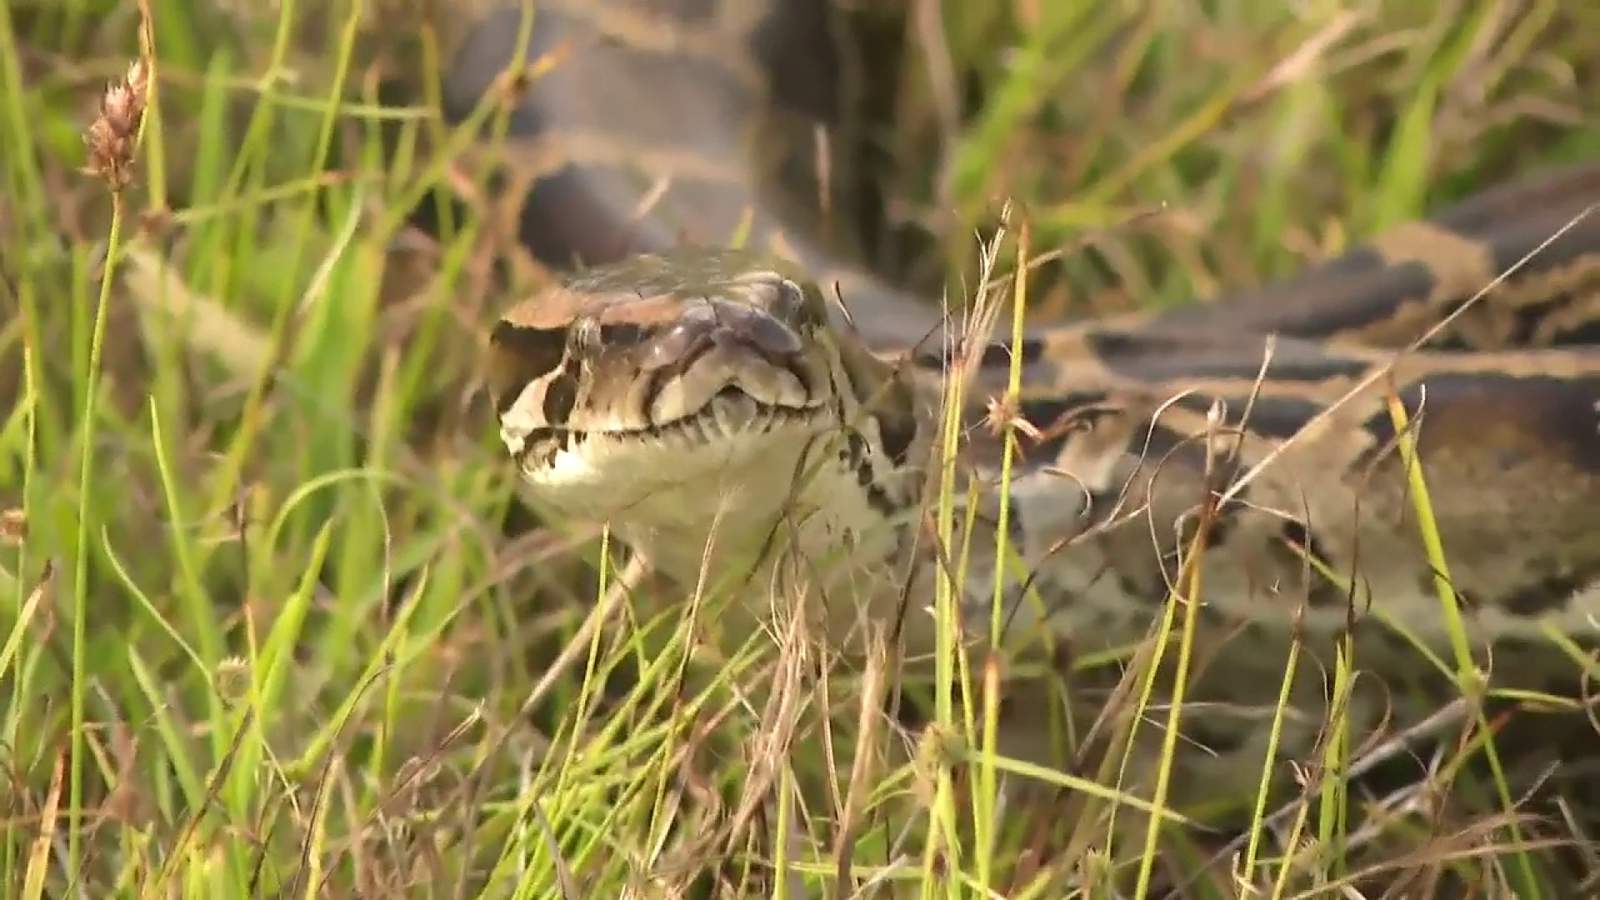 Snake and eggs? Floridians could soon eat invasive pythons